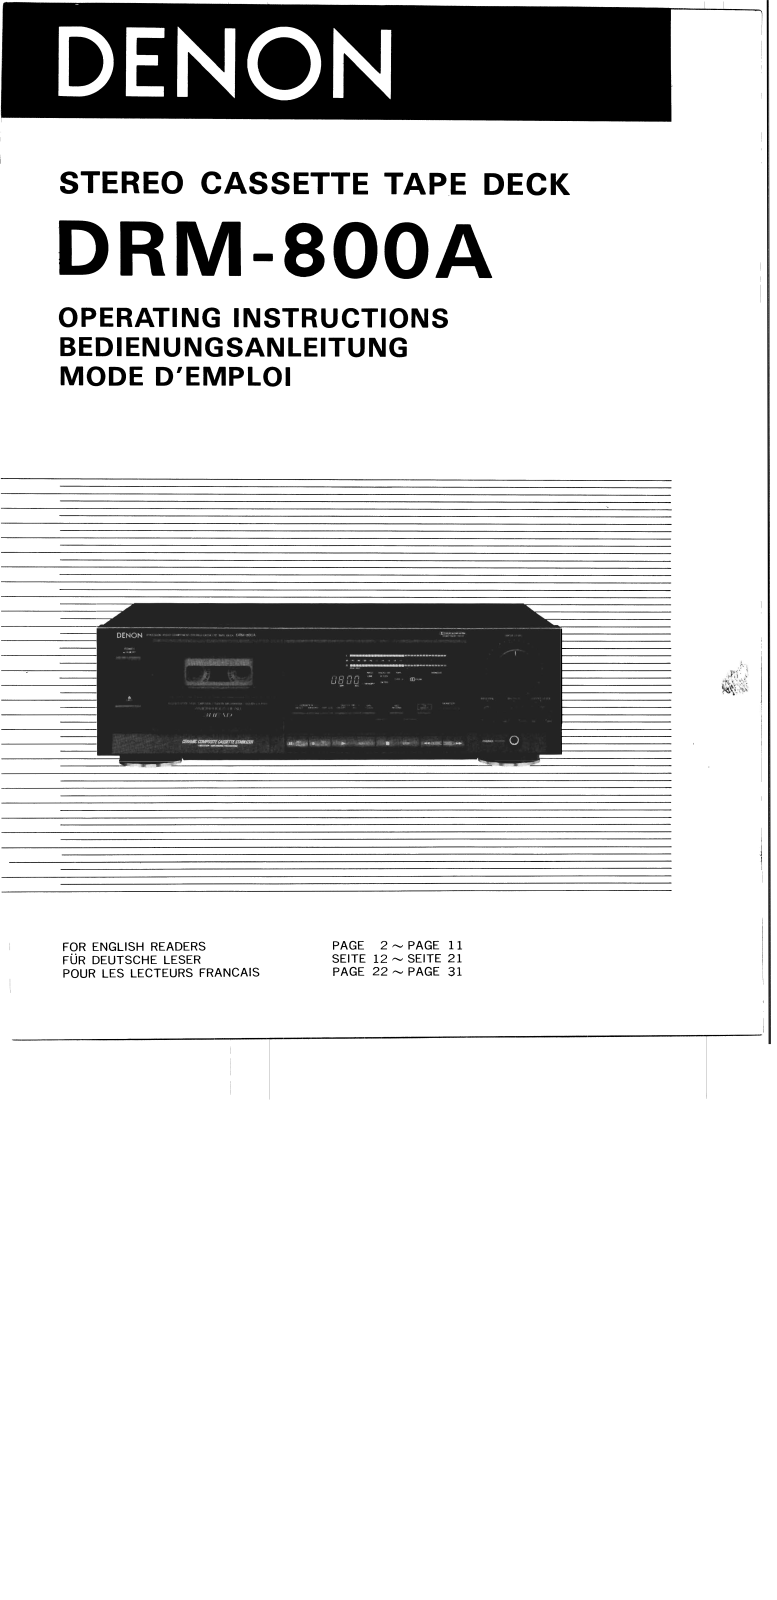 Denon DRM-800A Owner's Manual